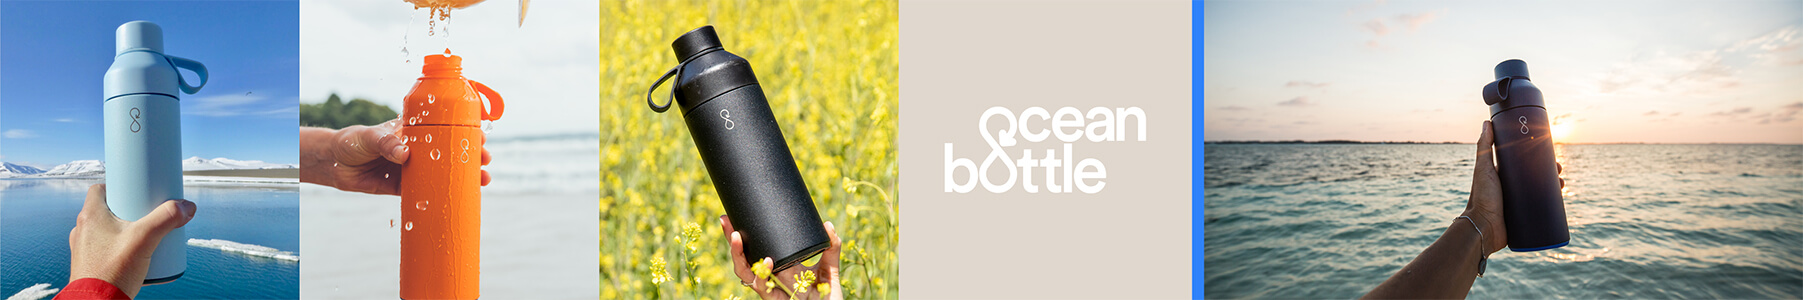 The world's most needed reusable water bottle. Ocean Bottle is a B Corp certified reusable bottle brand launched in 2019. Every Ocean Bottle sold, funds the collection of 1,000 ocean-bound plastic bottles in weight before they reach the water.